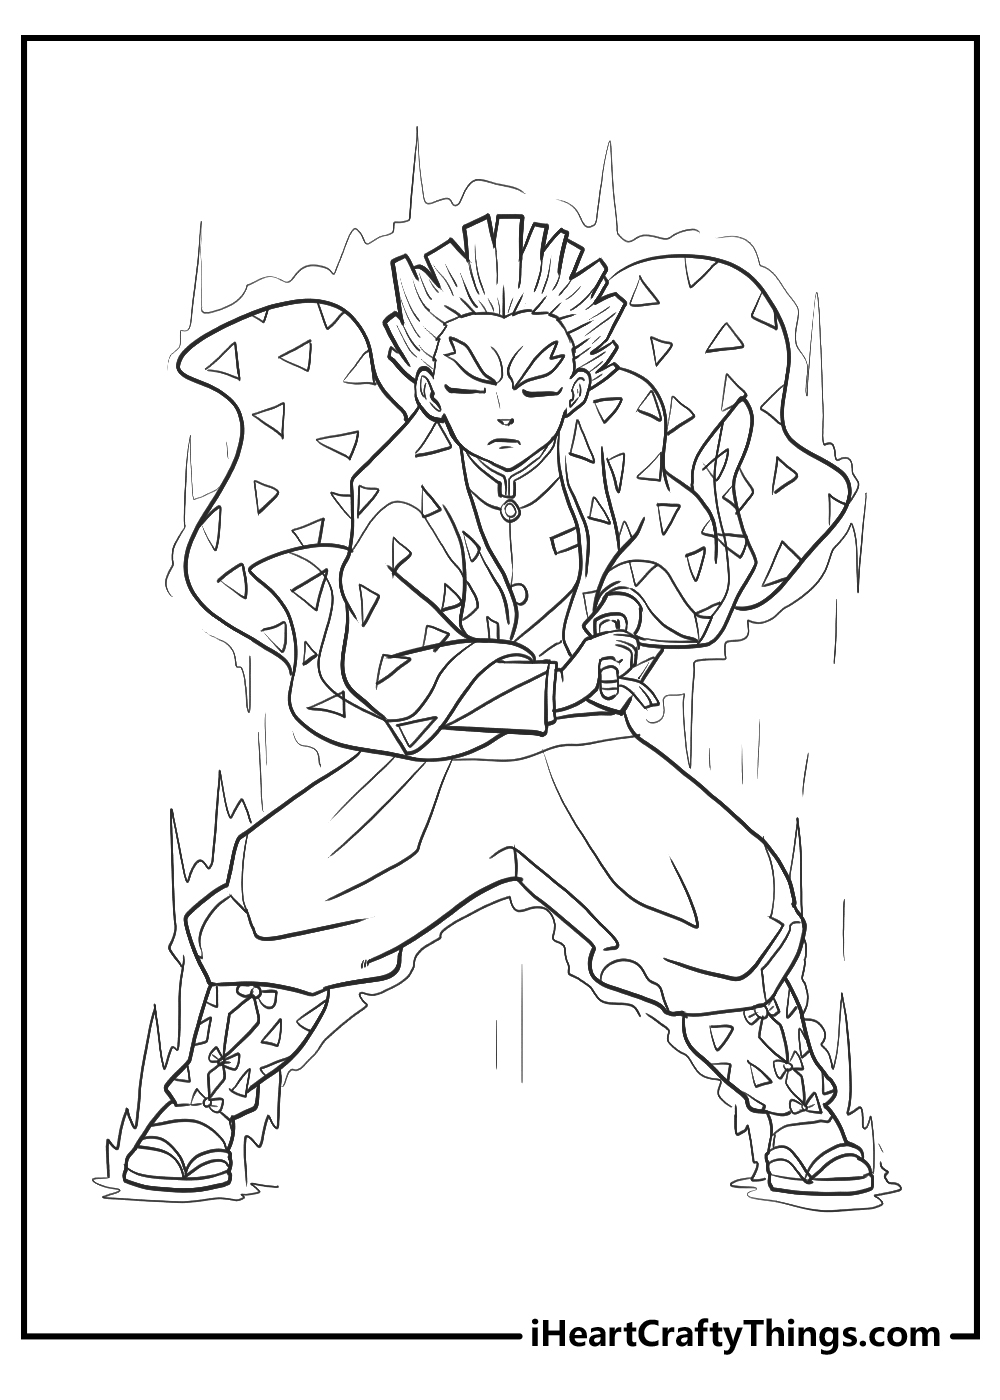 Inosuke 2 Coloring Page - Free Printable Coloring Pages for Kids